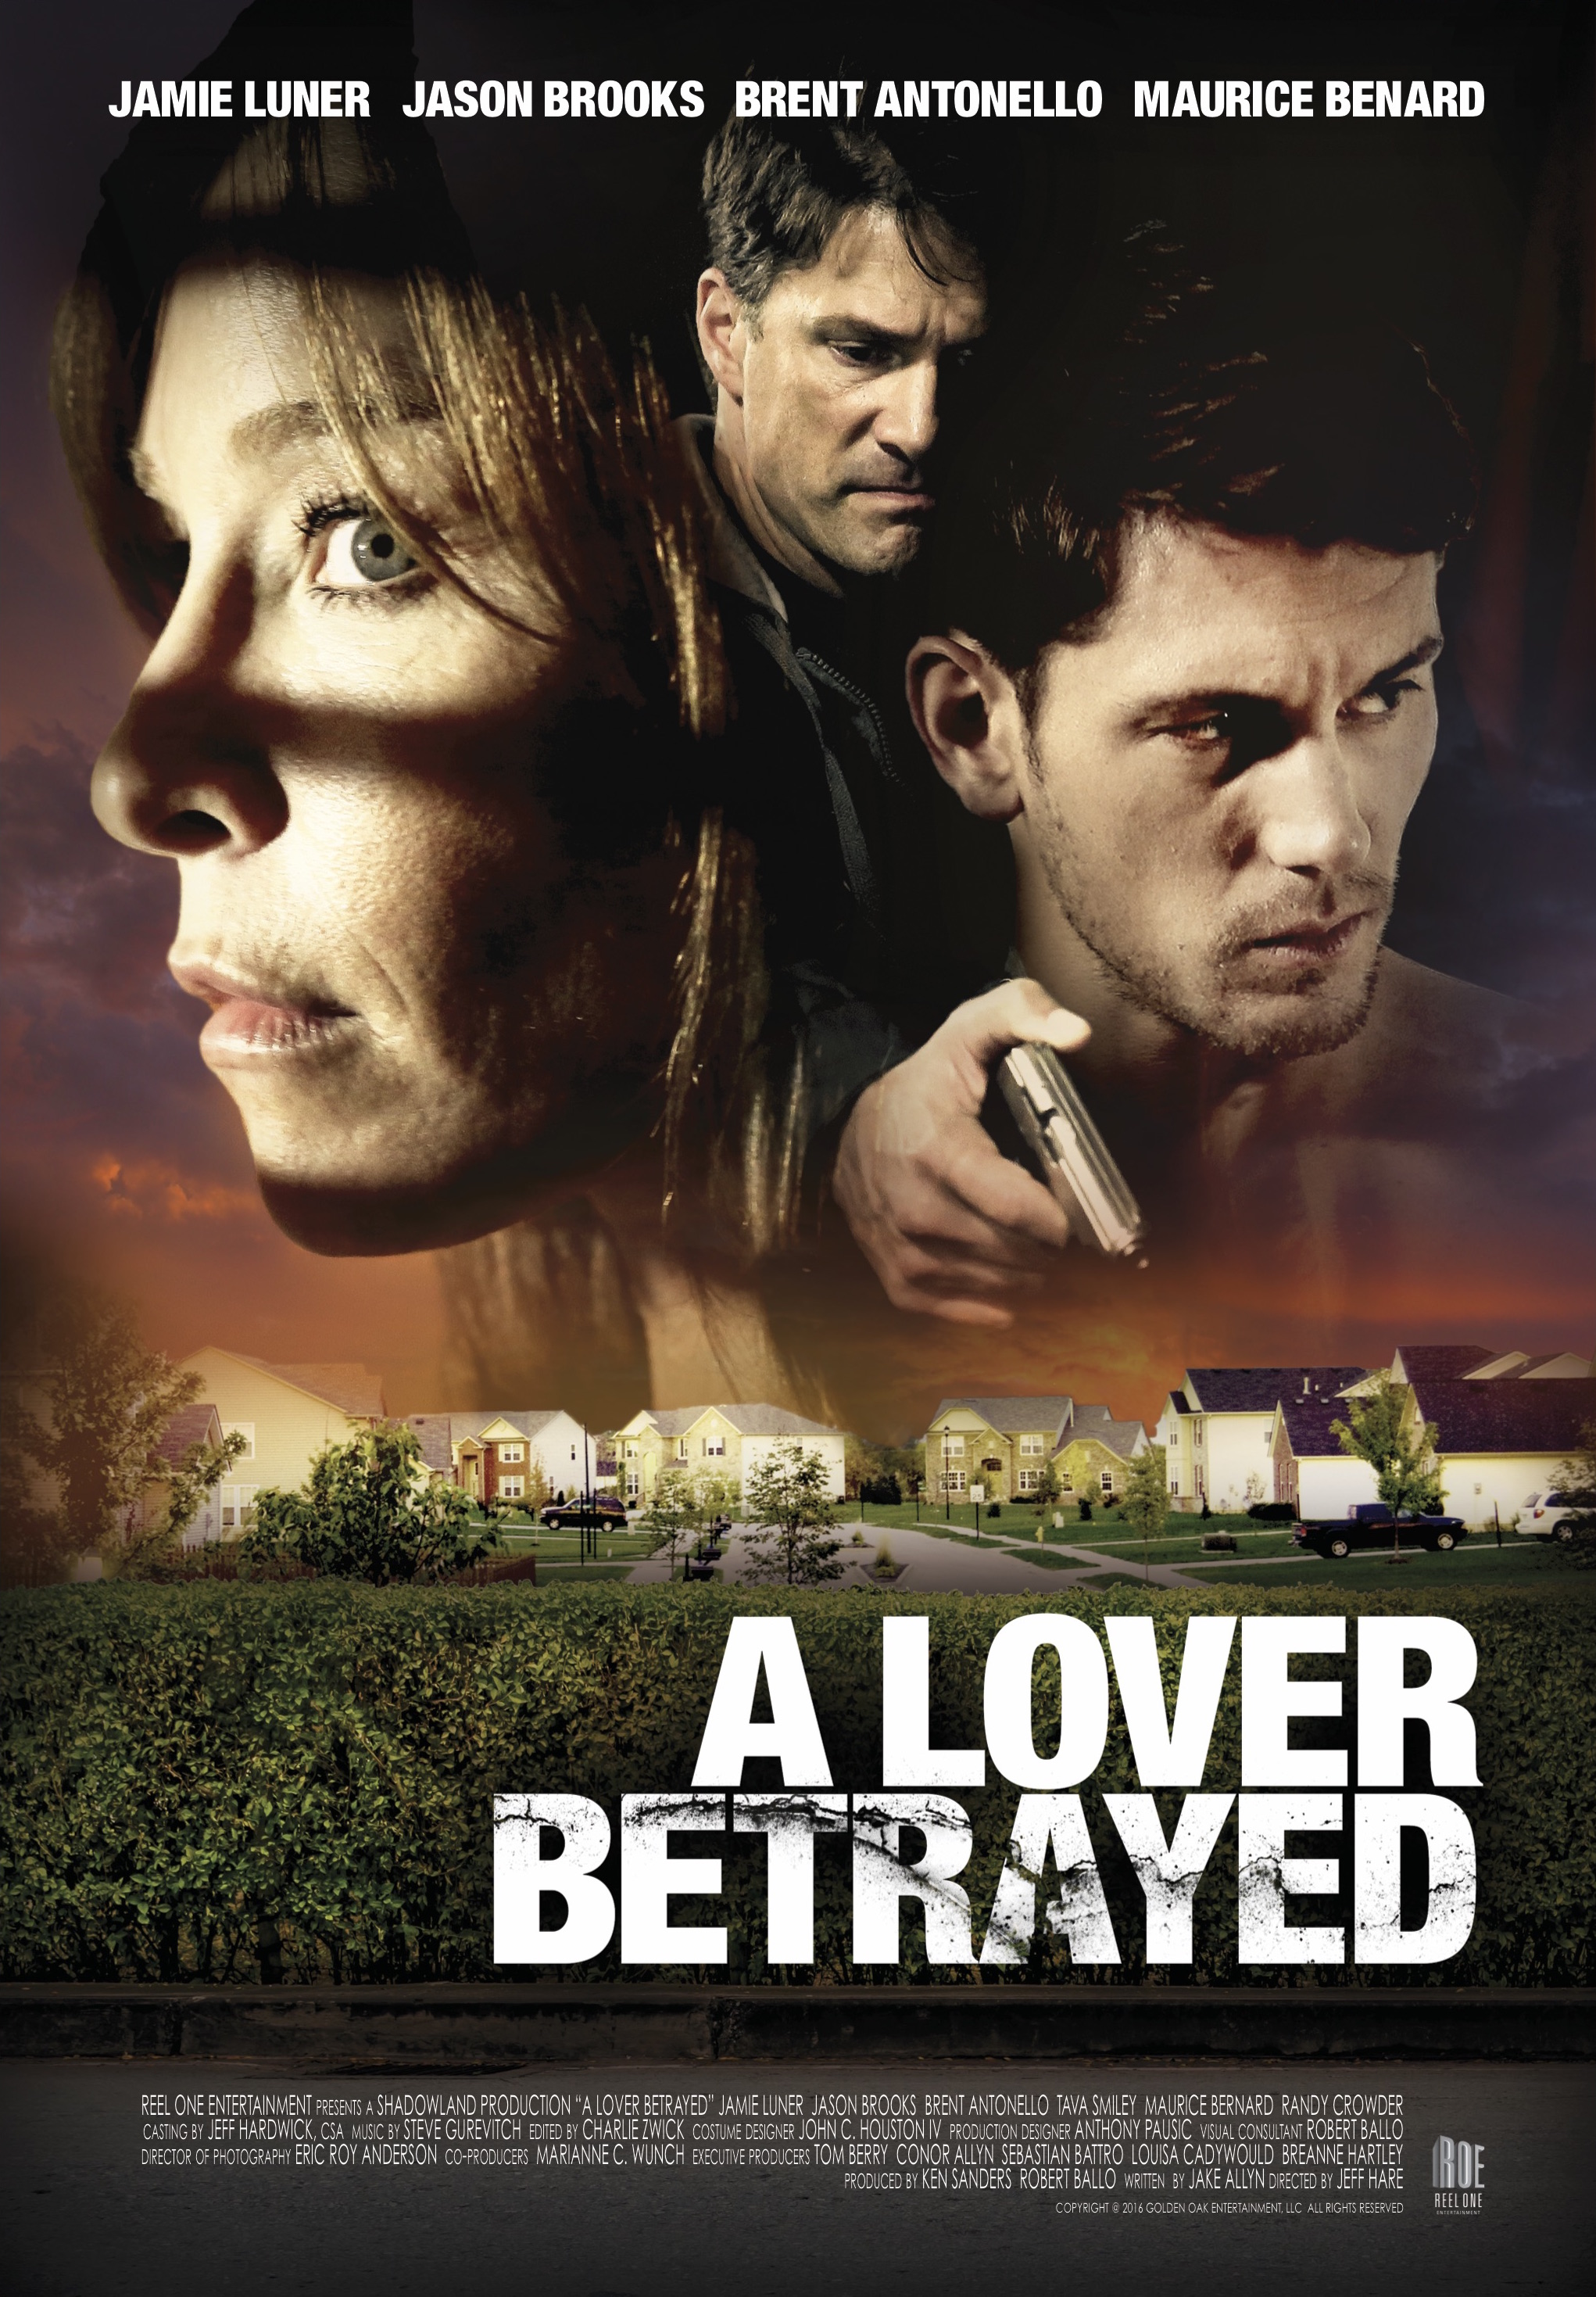 A Lover Betrayed (2017) starring Jamie Luner on DVD on DVD